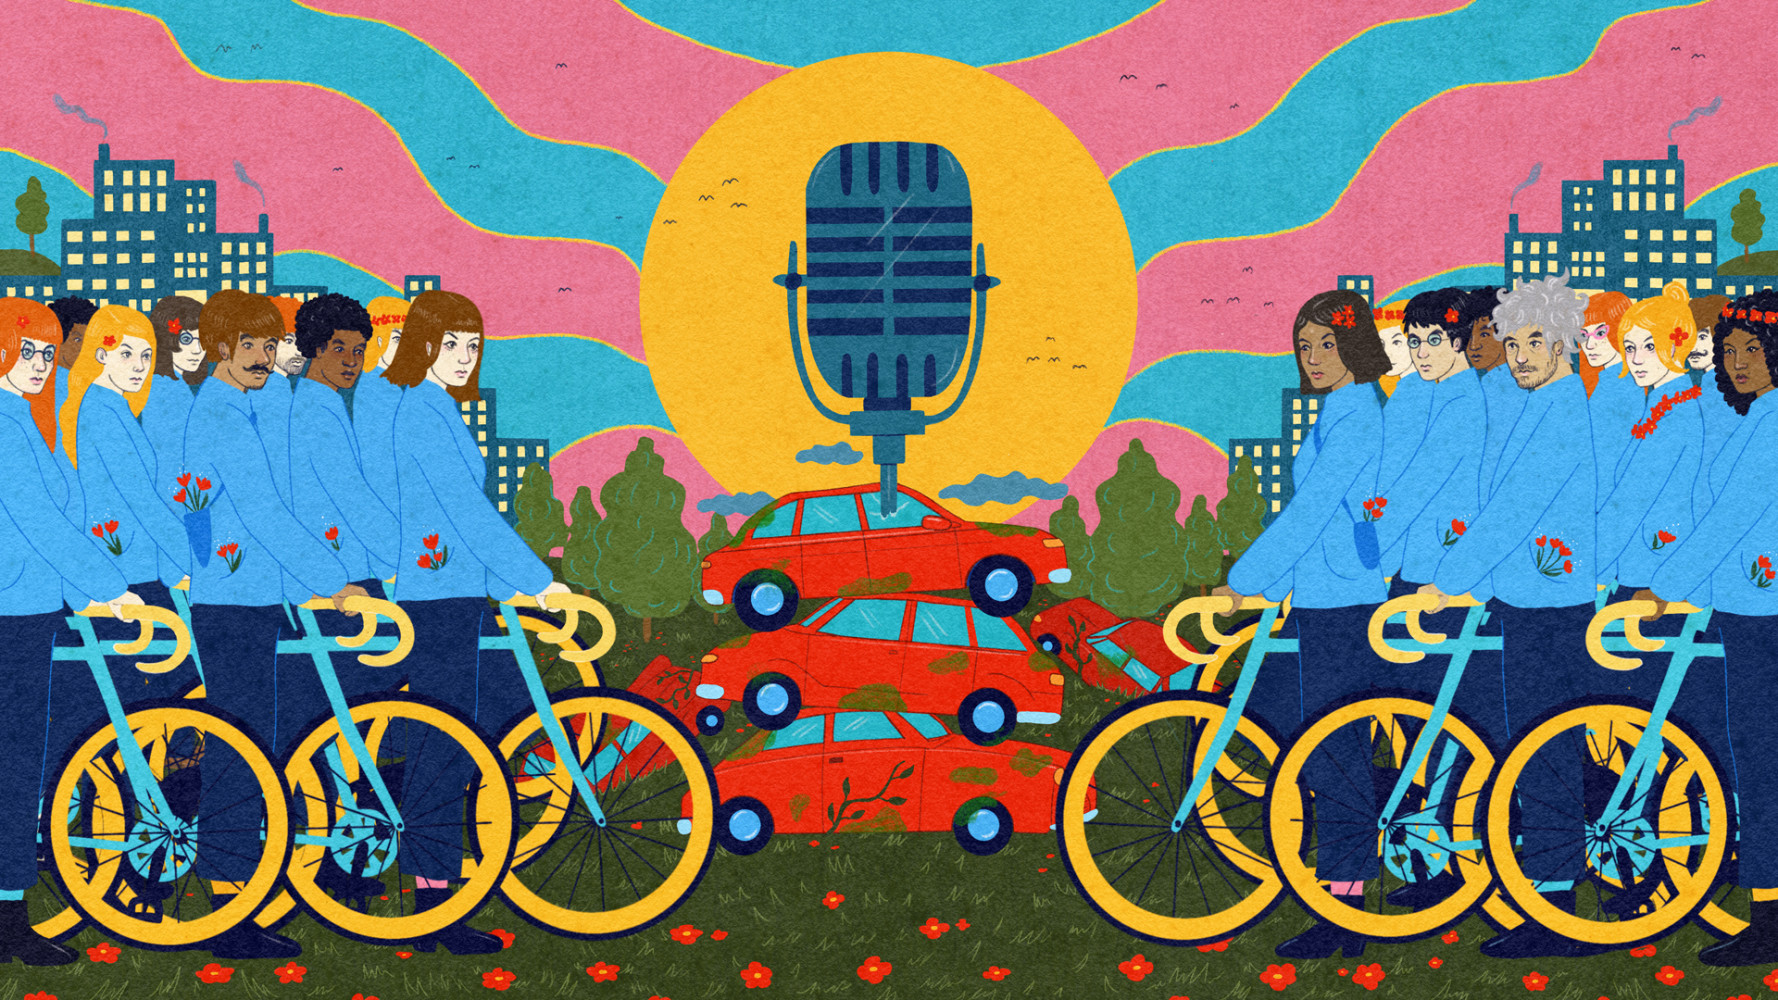 Illustration of cityscape with trees and greenery with a group of bikers huddled around a pile of cars that are pinned down by a large microphone.